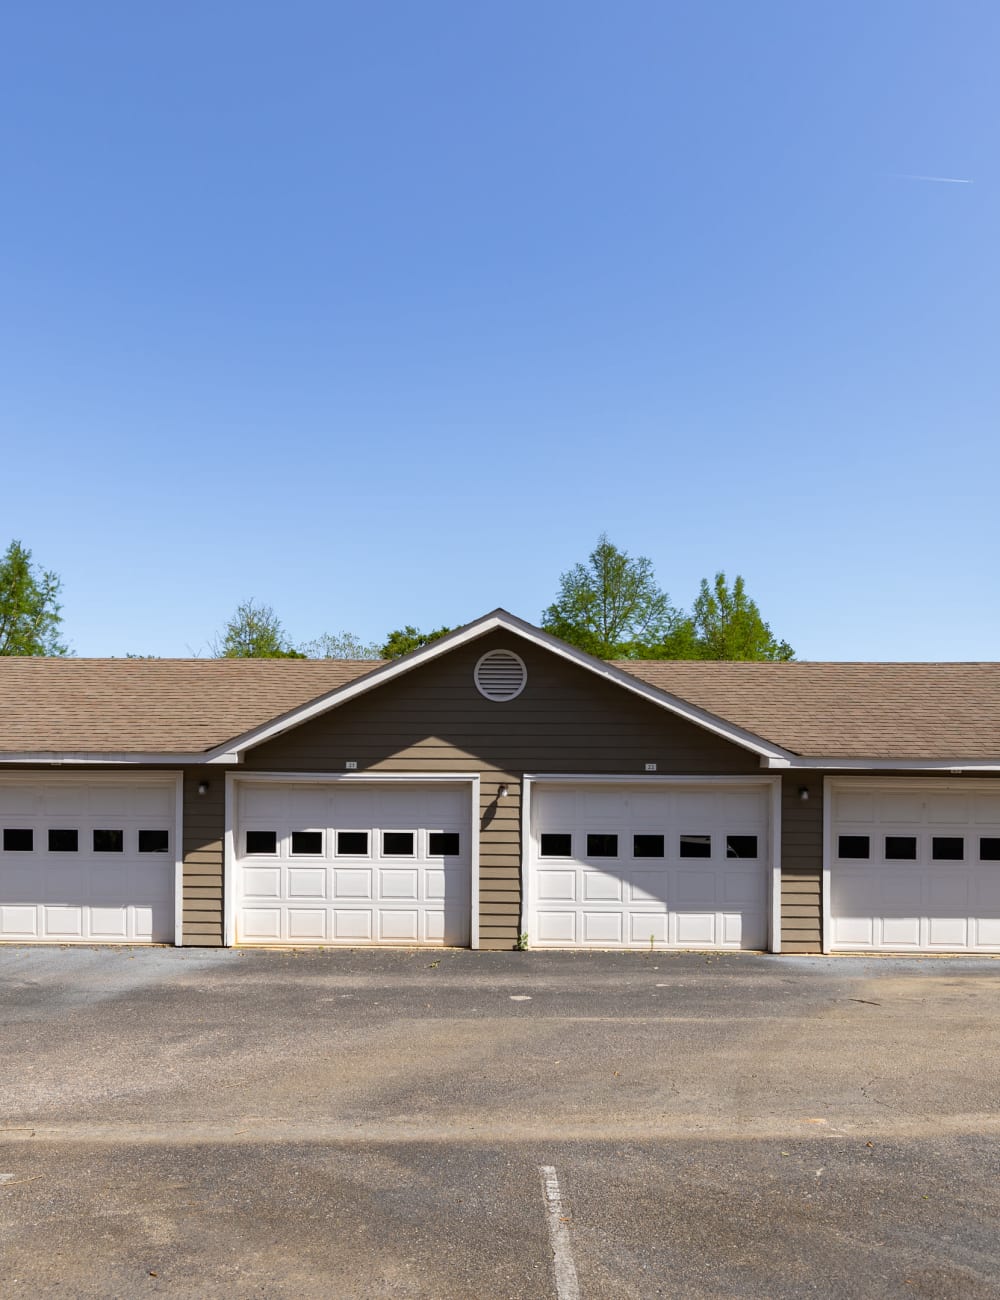 Garages available for residents at Gates at Jubilee in Daphne, Alabama